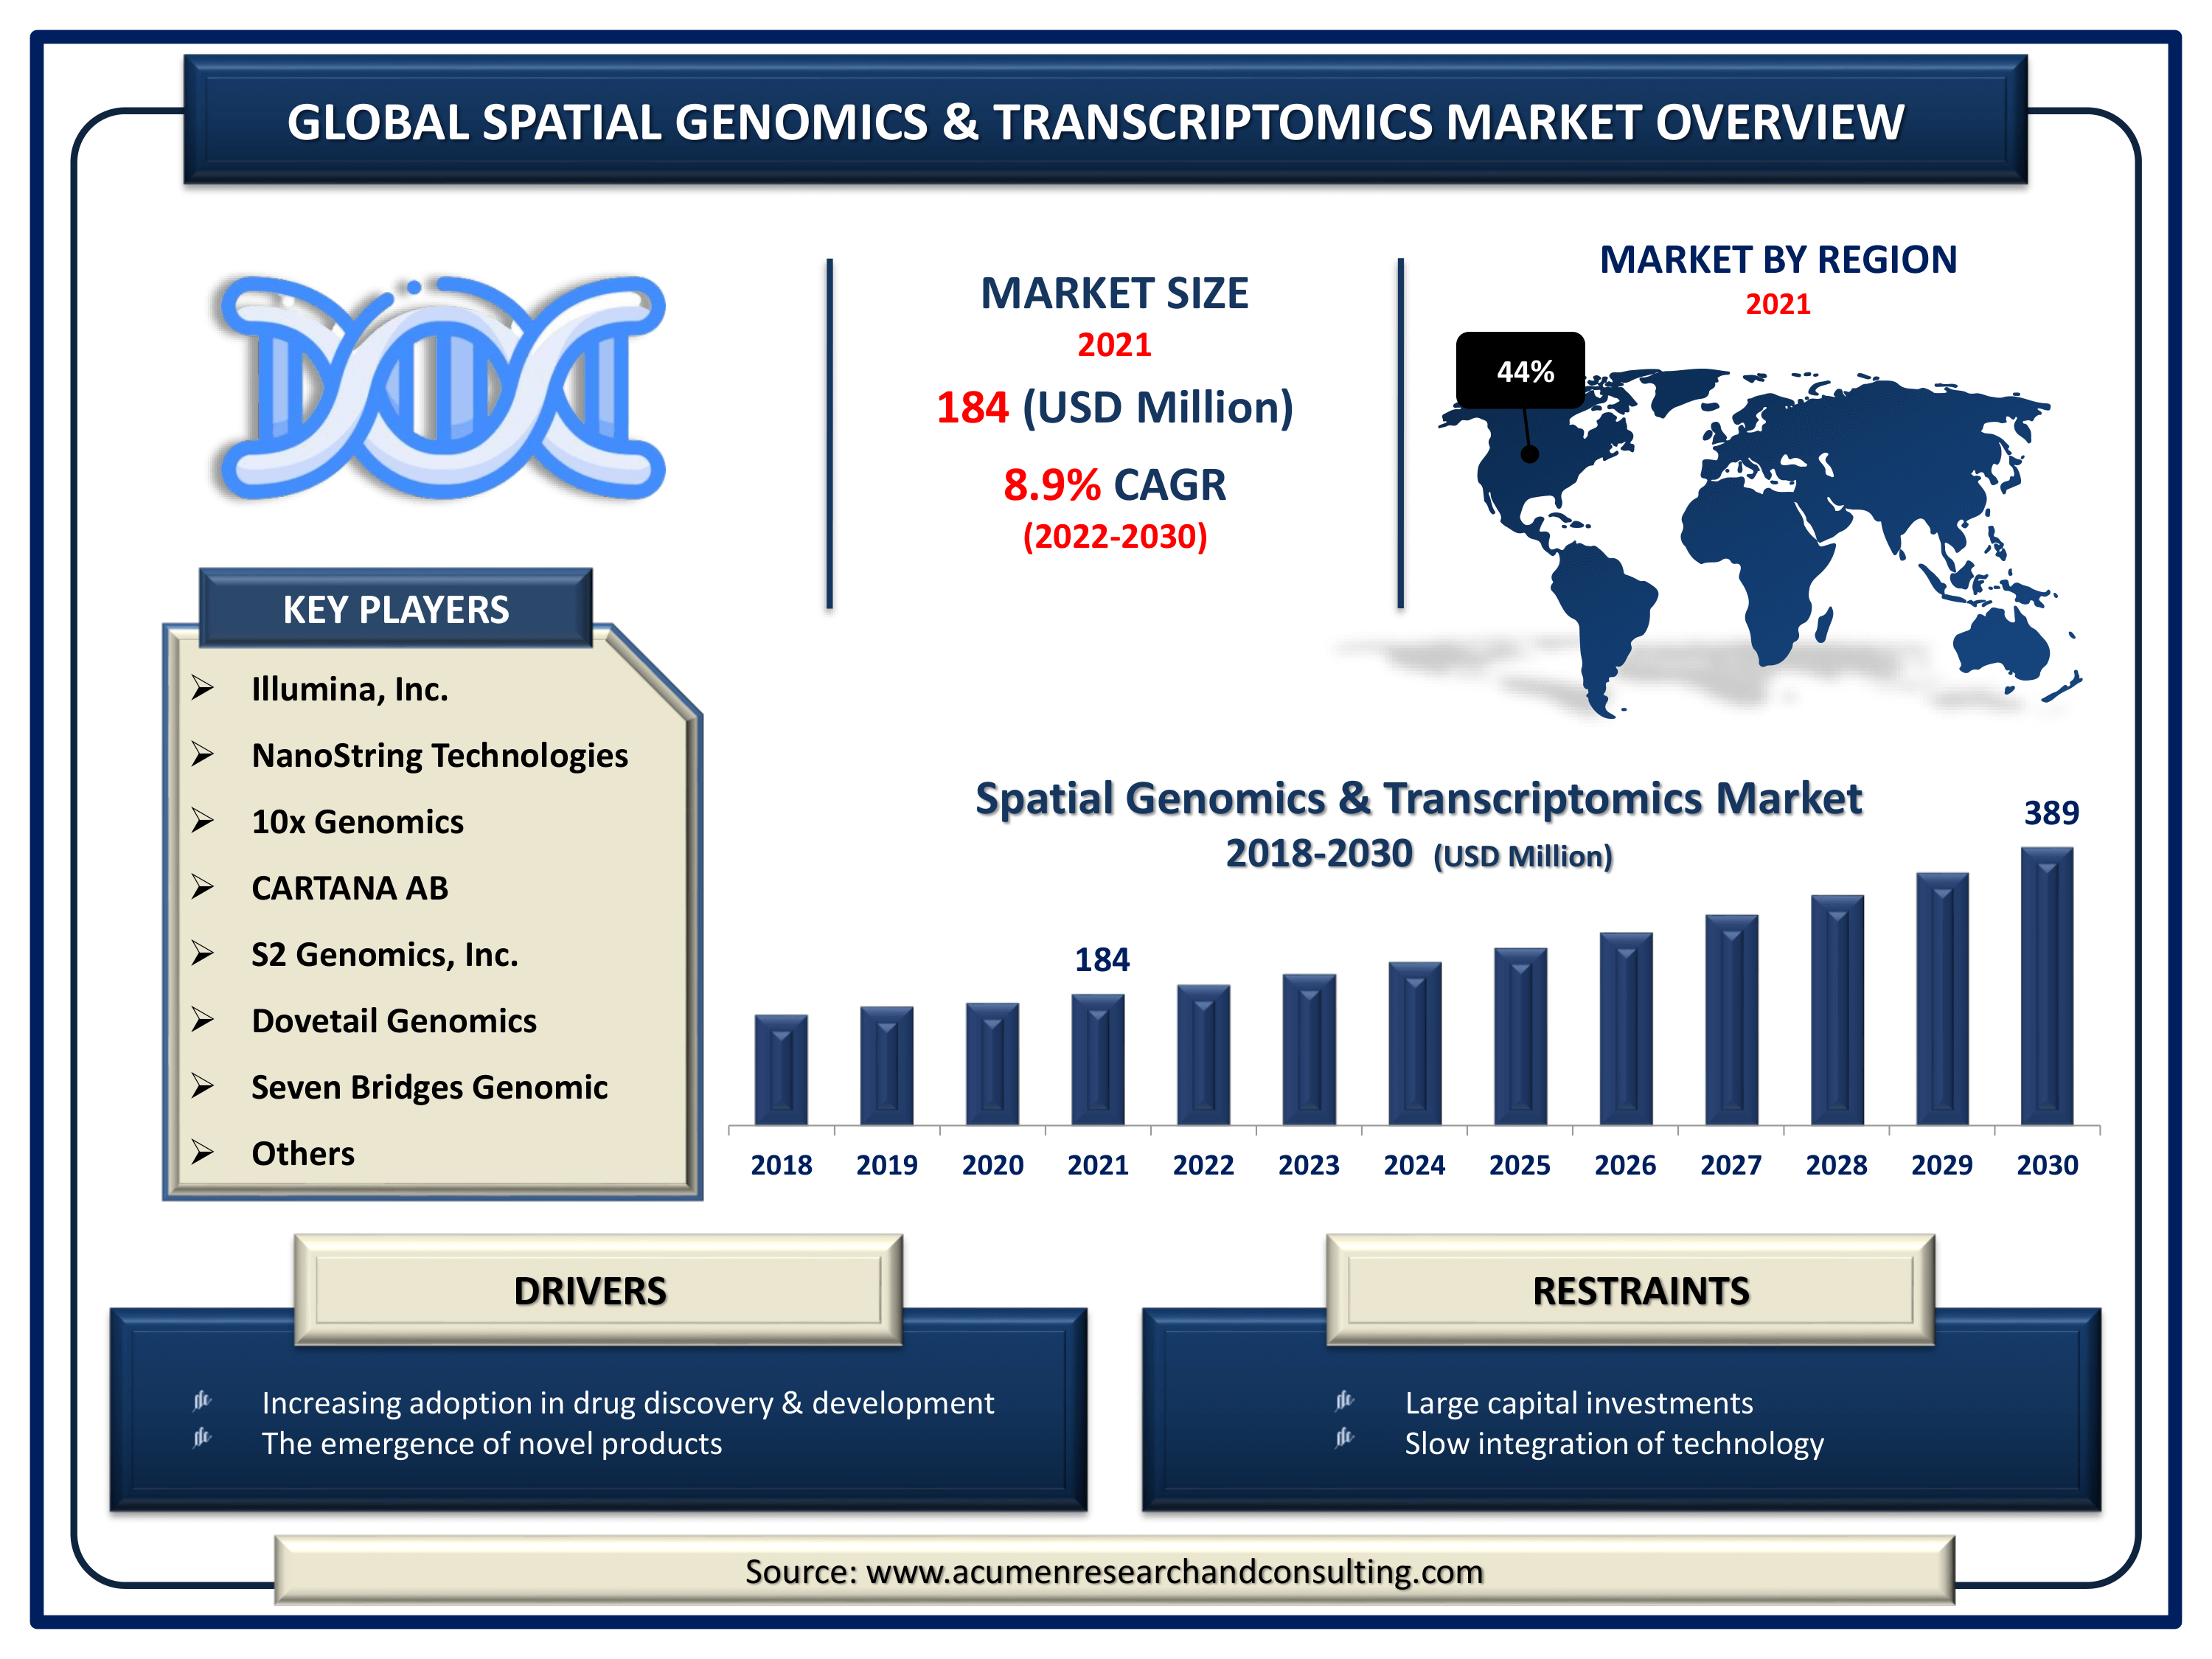 Global spatial genomics & transcriptomics market revenue is expected to increase by USD 389 million by 2030, with 8.9% CAGR from 2022 to 2030.